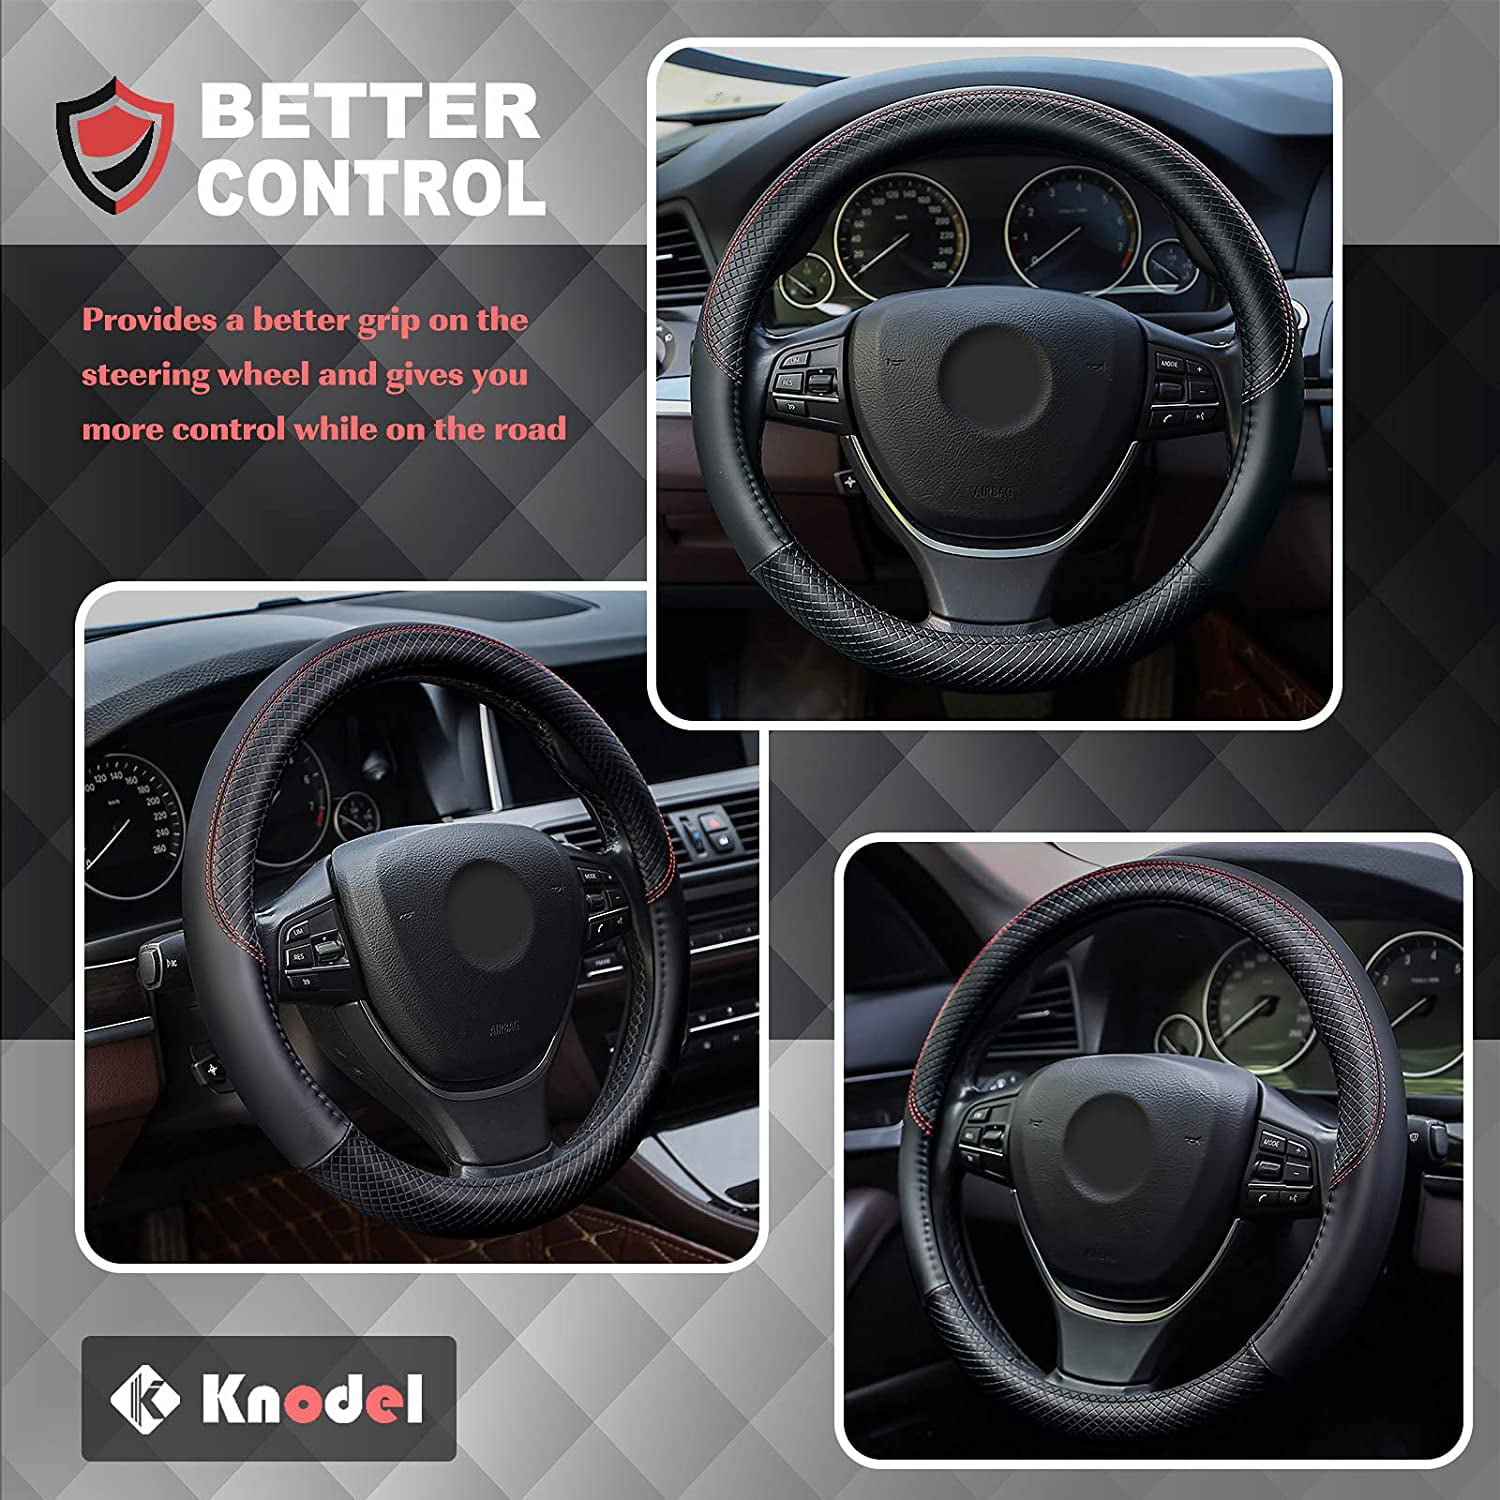 15 Inches Leather Steering Wheel Protector Blcak Black Microfiber Leather Knodel Auto Car Steering Wheel Cover Universal Fit Anti-Slip 